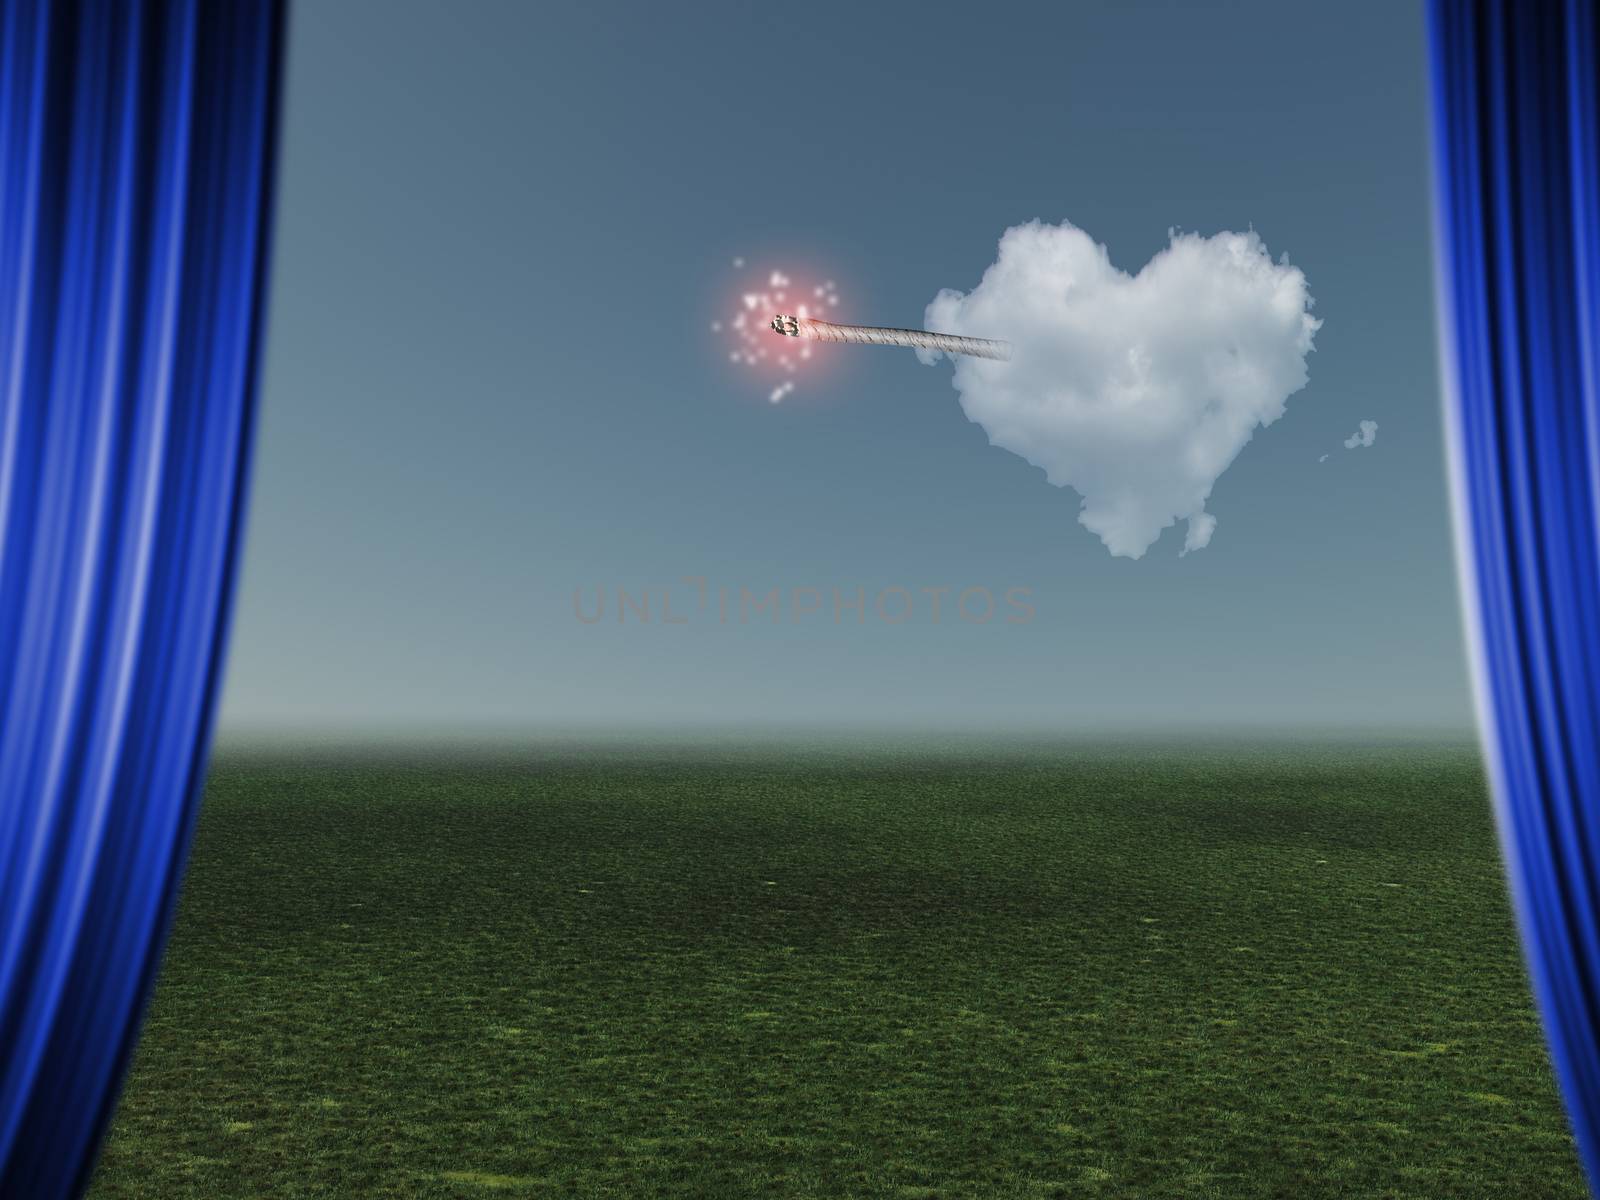 Surrealism. Cloud in shape of love heart with ignited wick. 